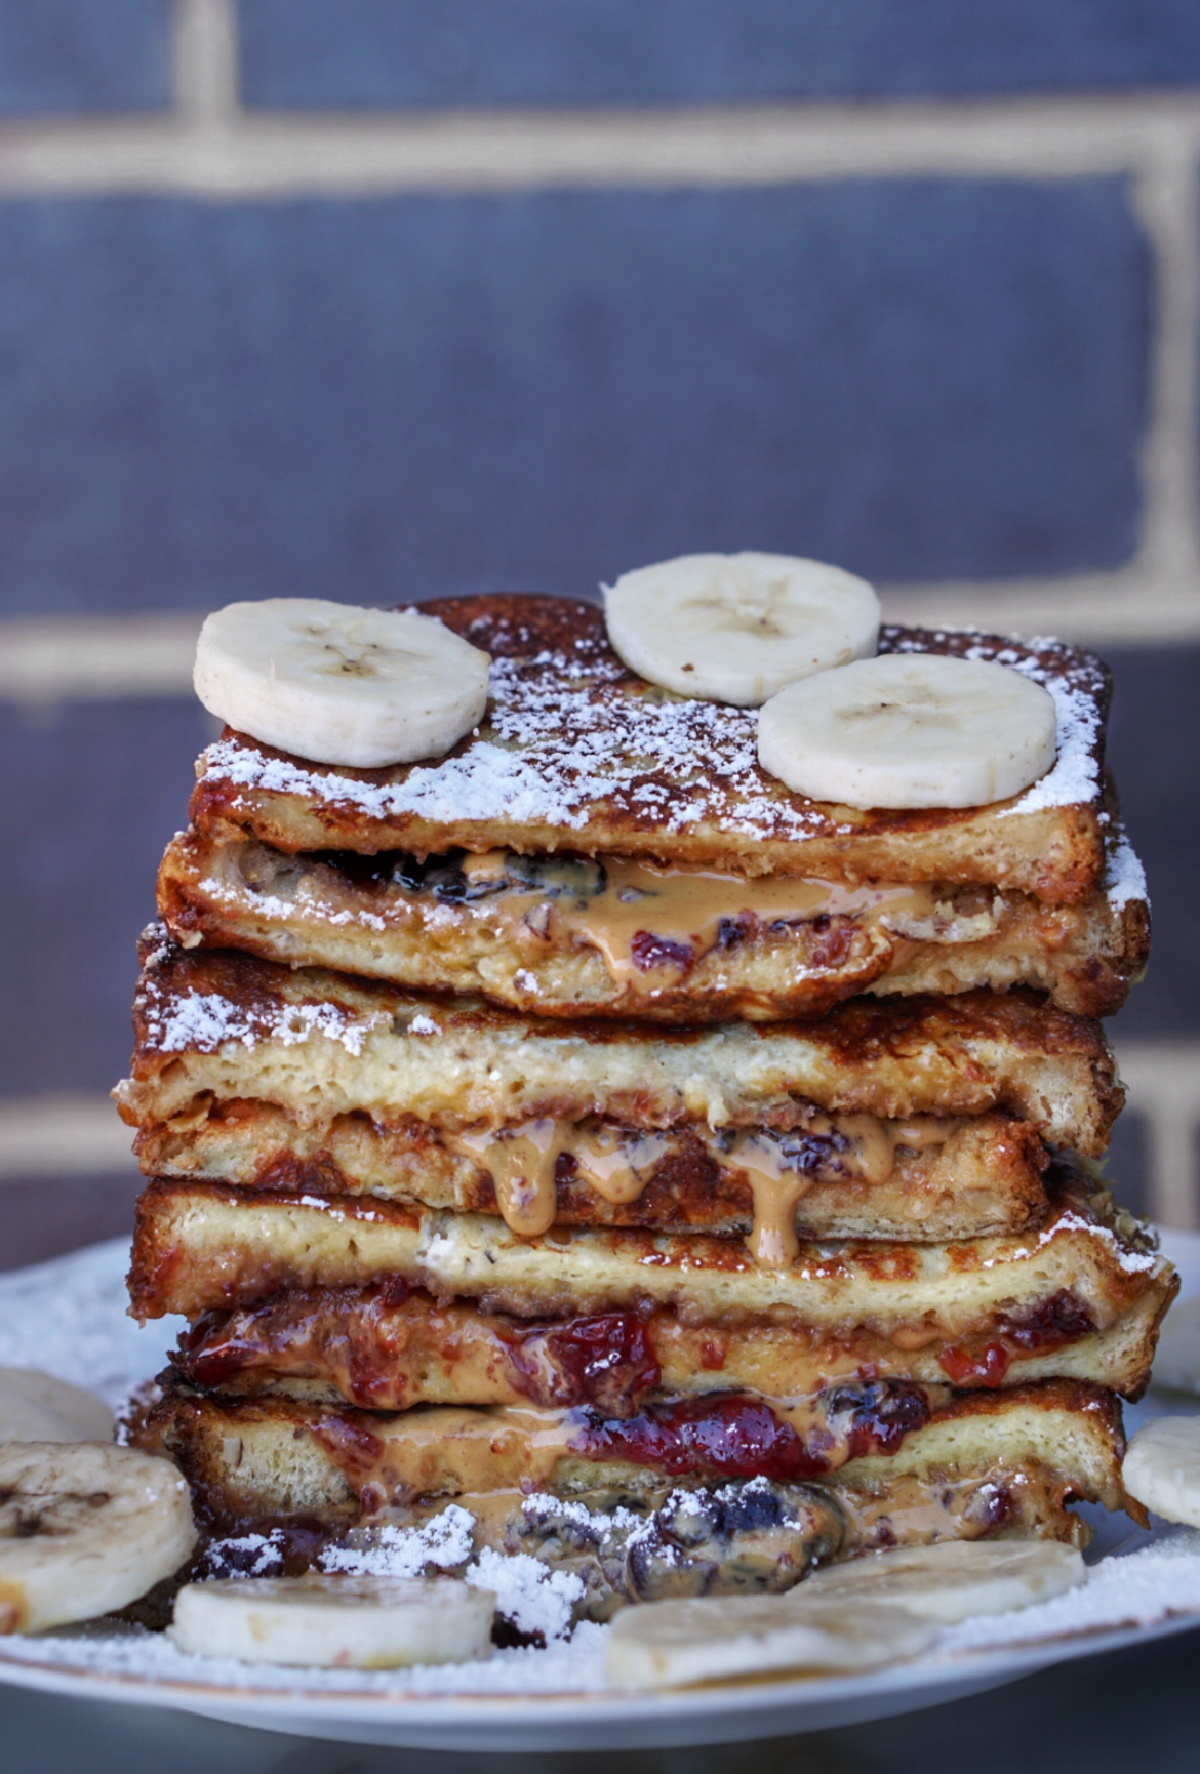 peanut butter and jelly stuffed french toast stacked and topped with bananas